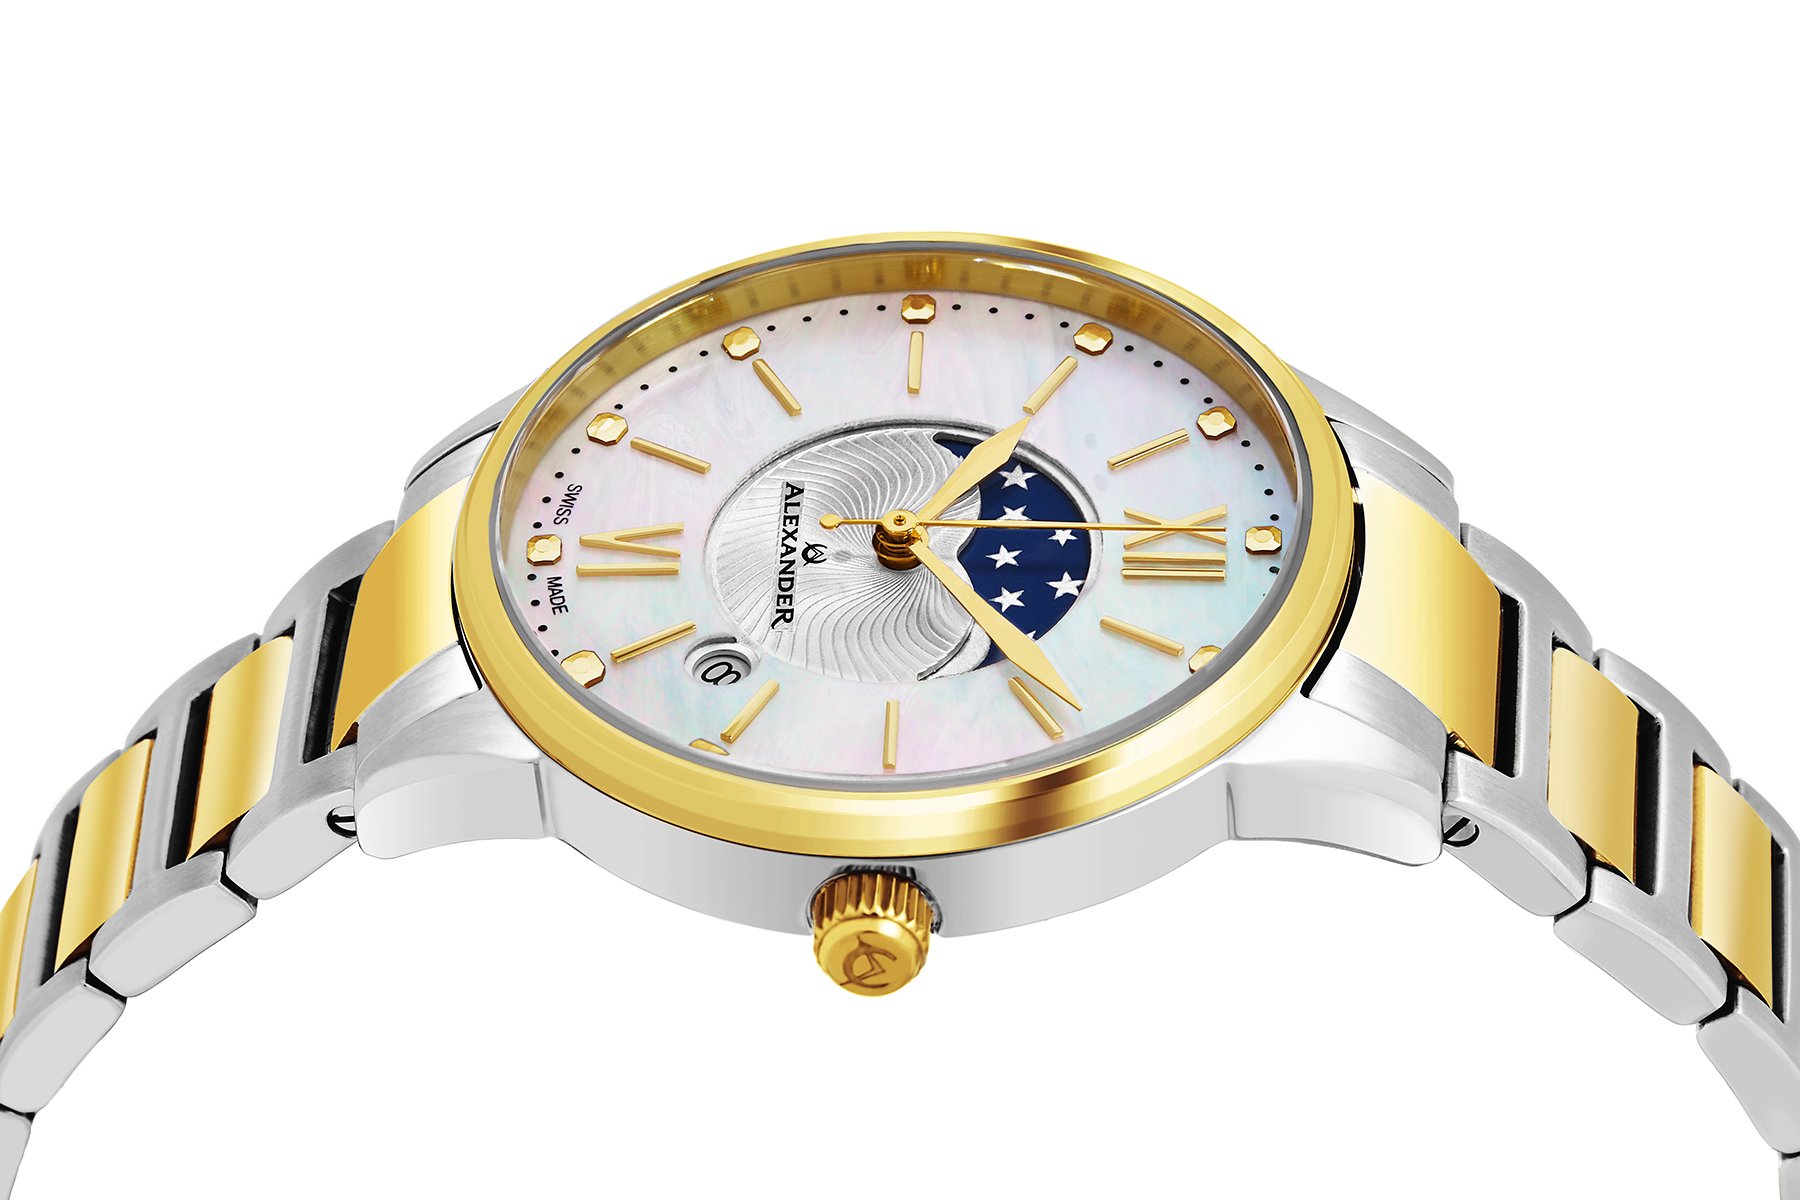 Alexander Monarch Vassilis Moon Phase Date White Mother of Pearl 35 MM Face Stainless Steel Yellow Gold Watch for Women - Swiss Quartz Elegant Two Tone Ladies Fashion Designer Dress Watch A204B-04